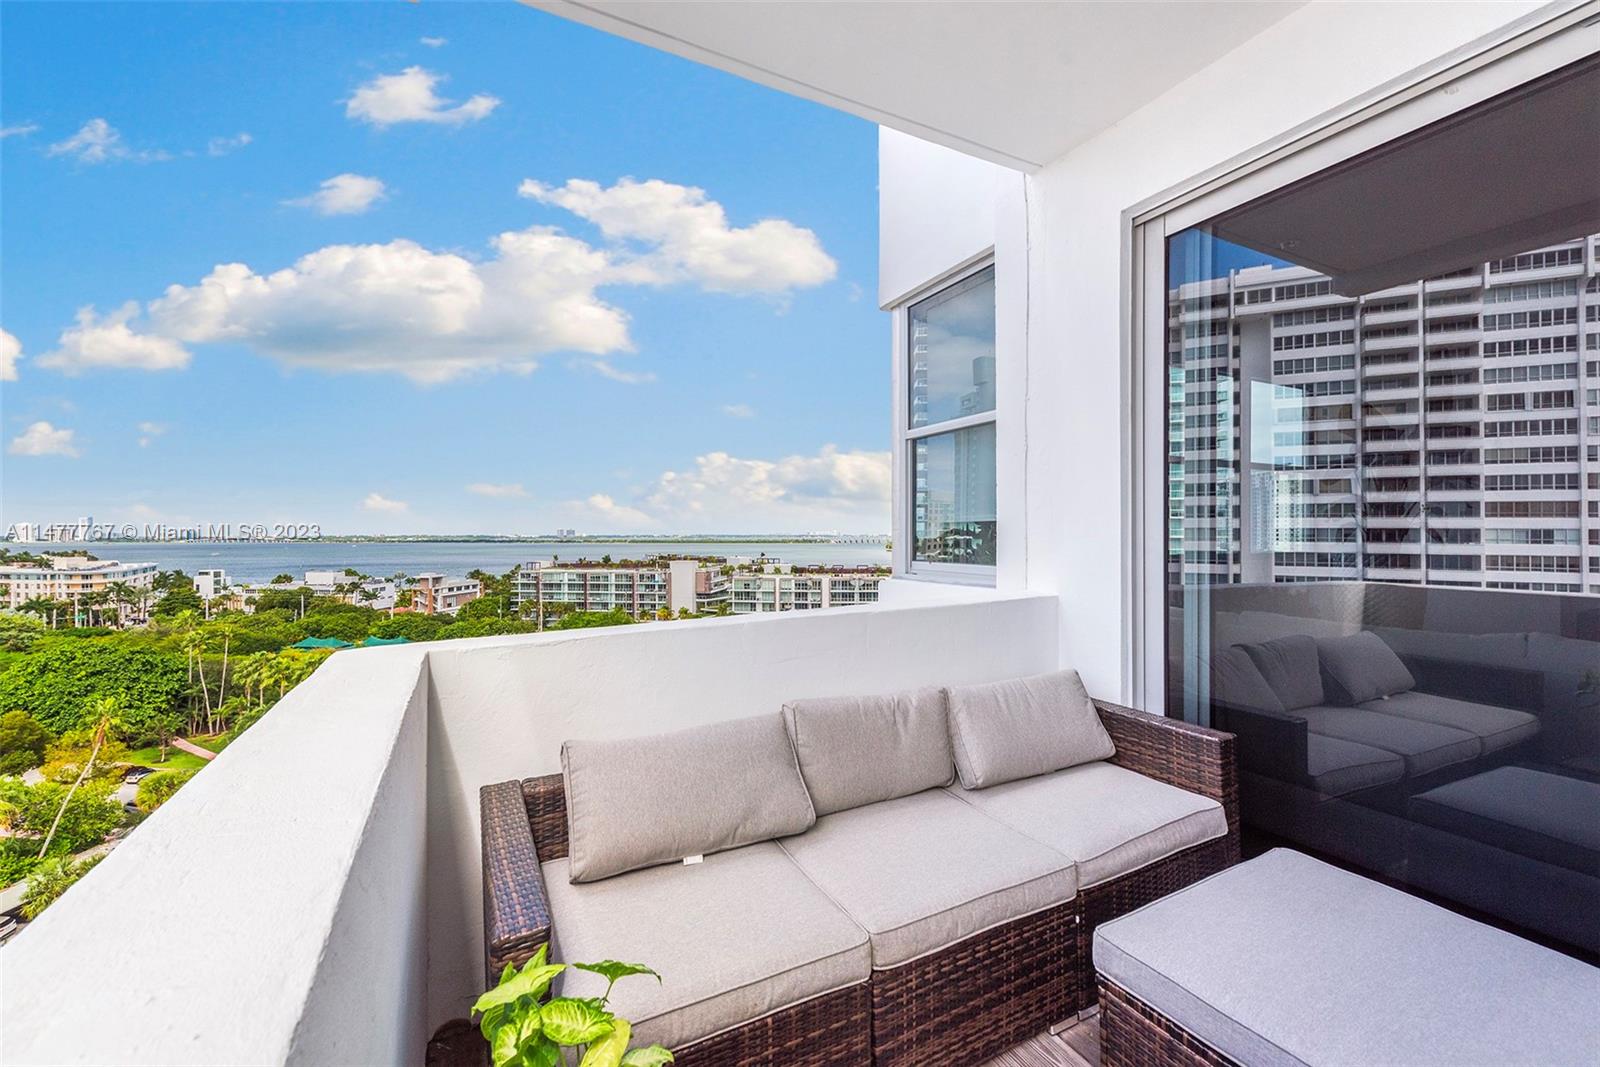 20  Island Ave #1001 For Sale A11477767, FL